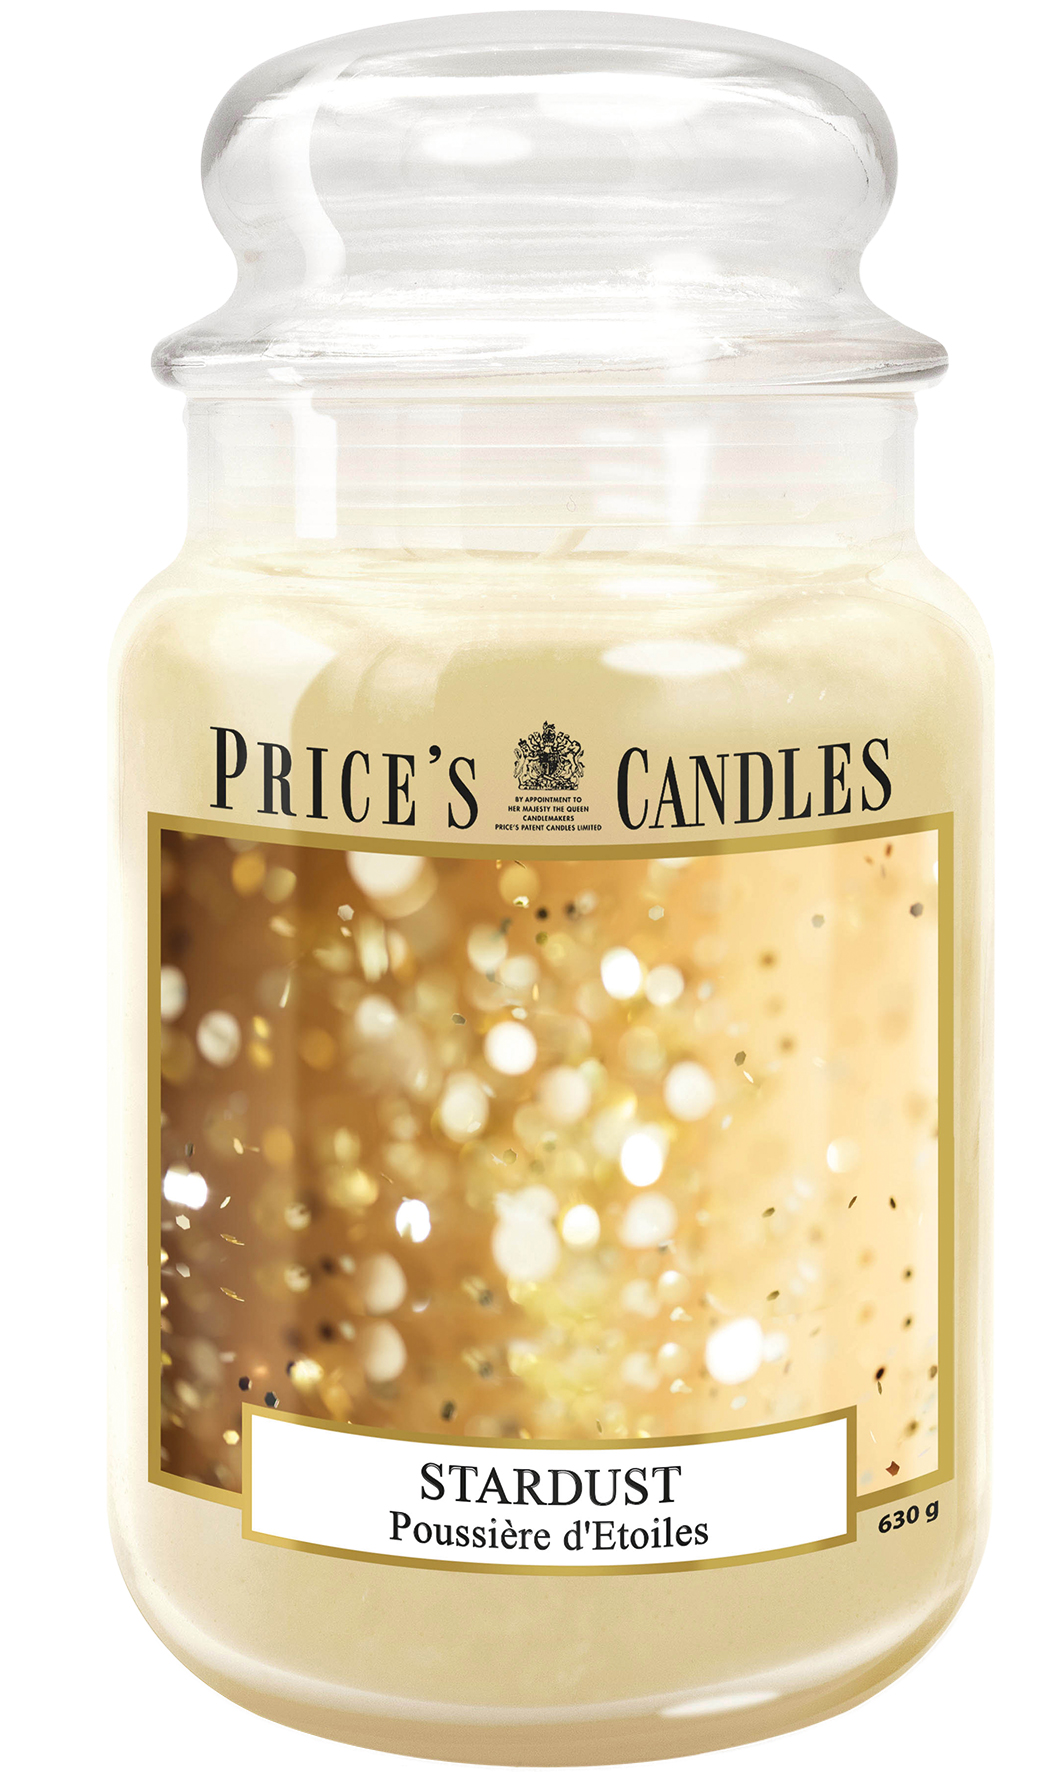 Prices Candle "Stardust" 630g   